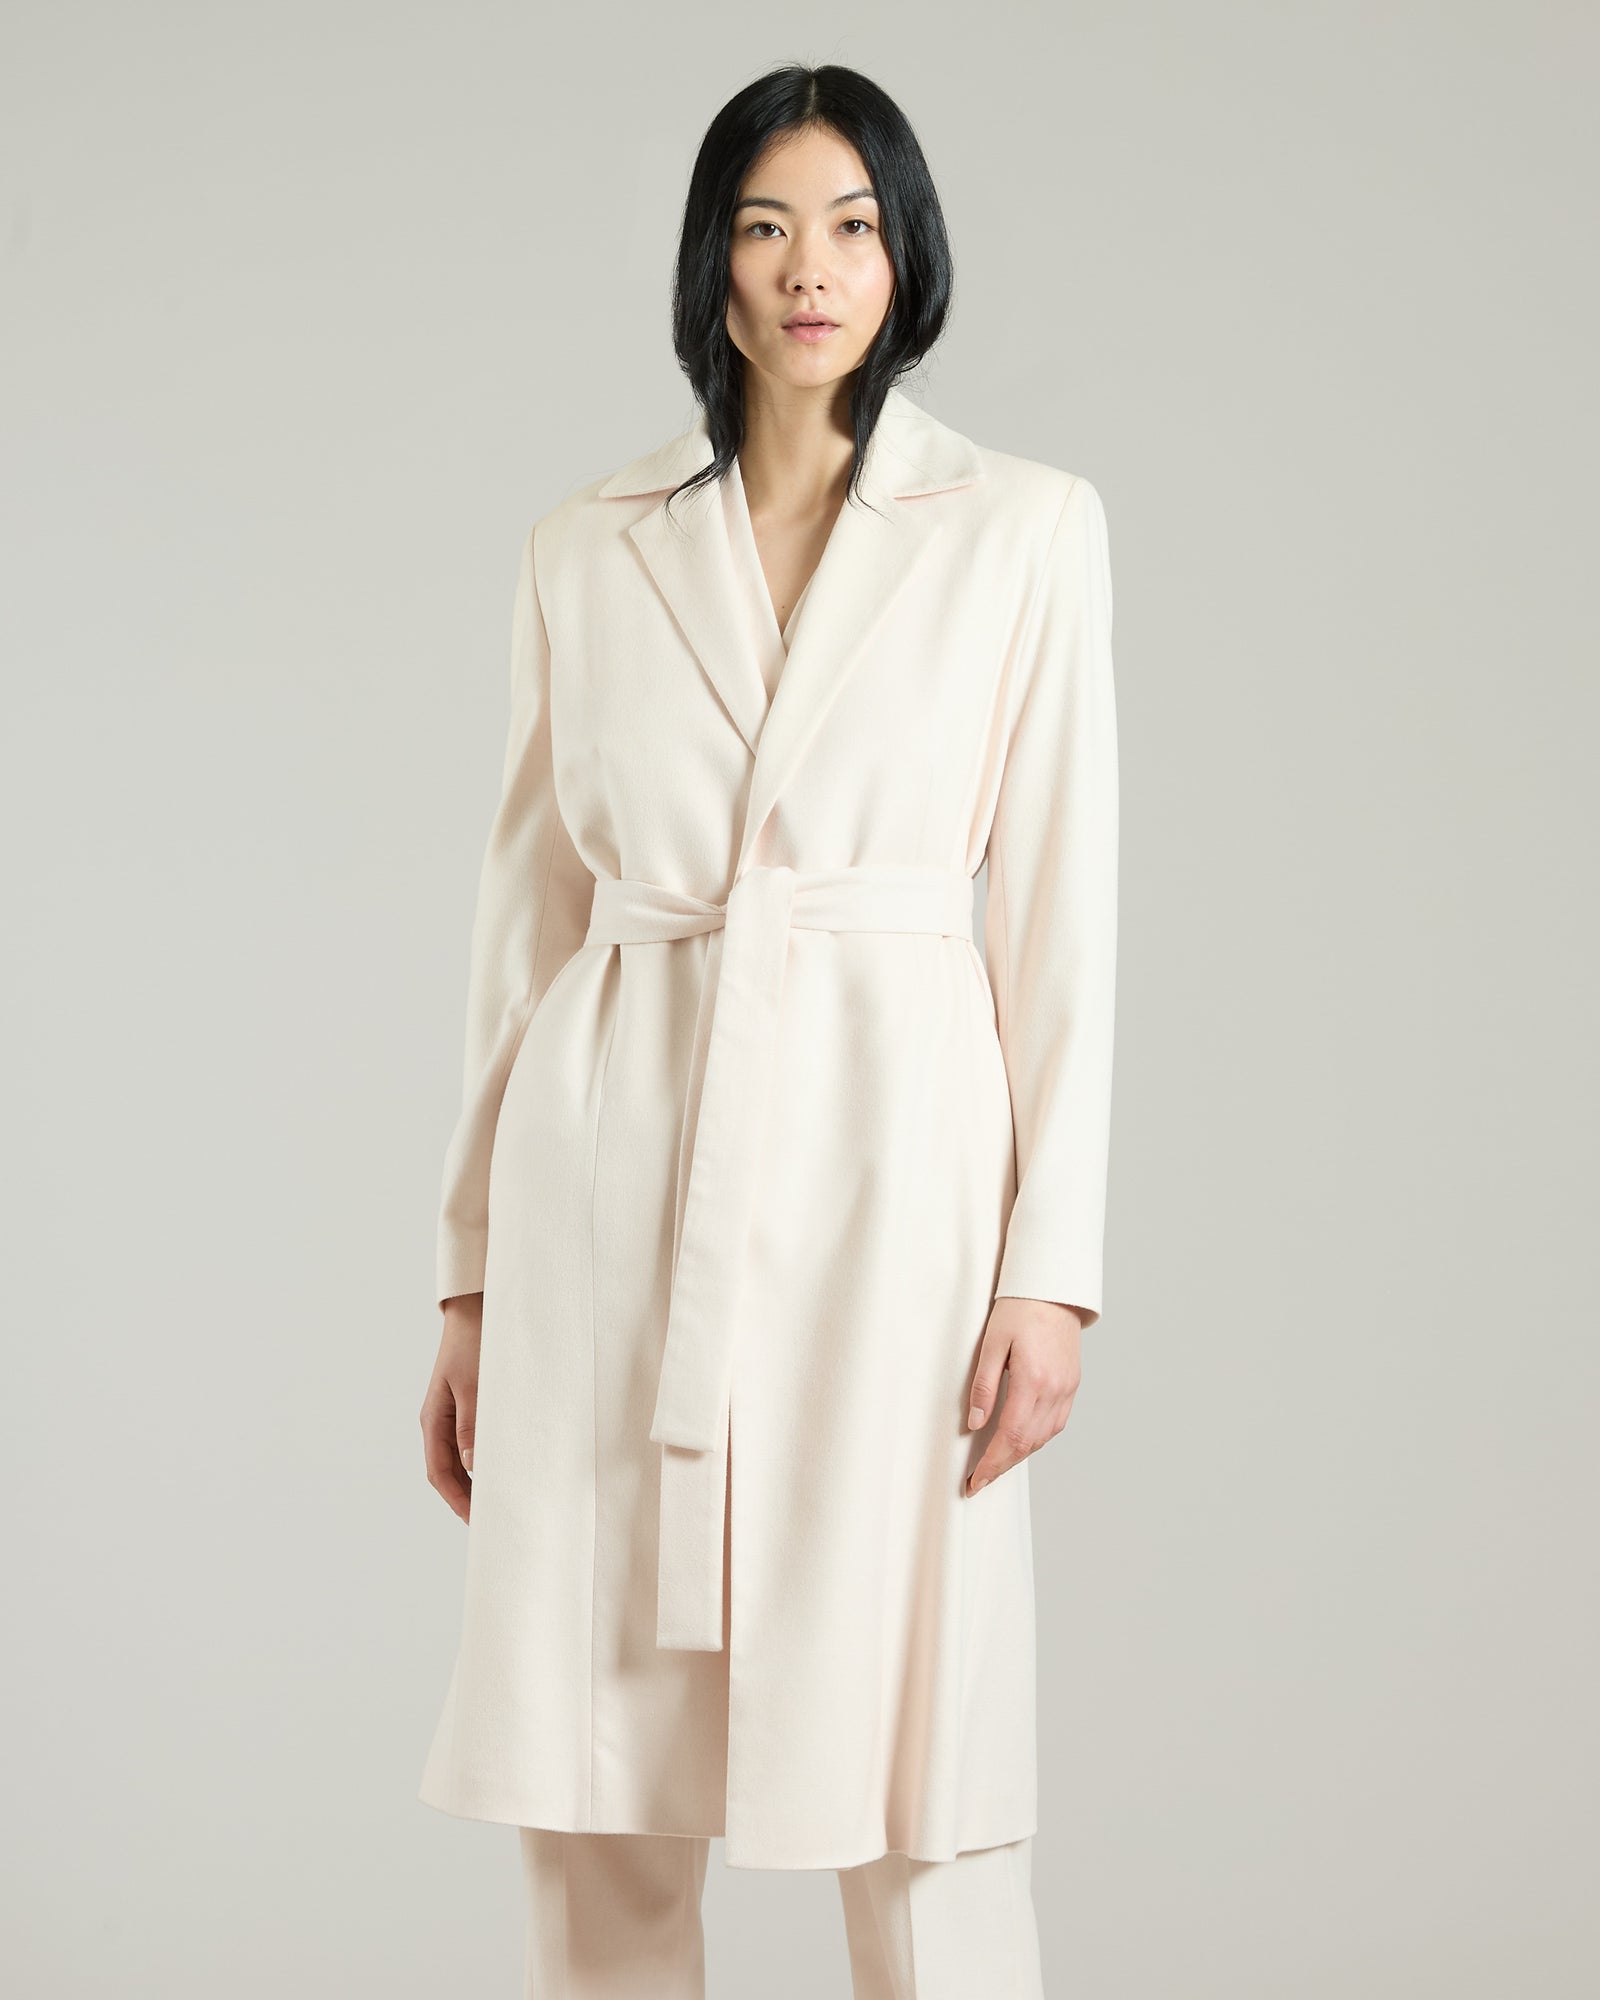 Cashmere and Silk Outwear